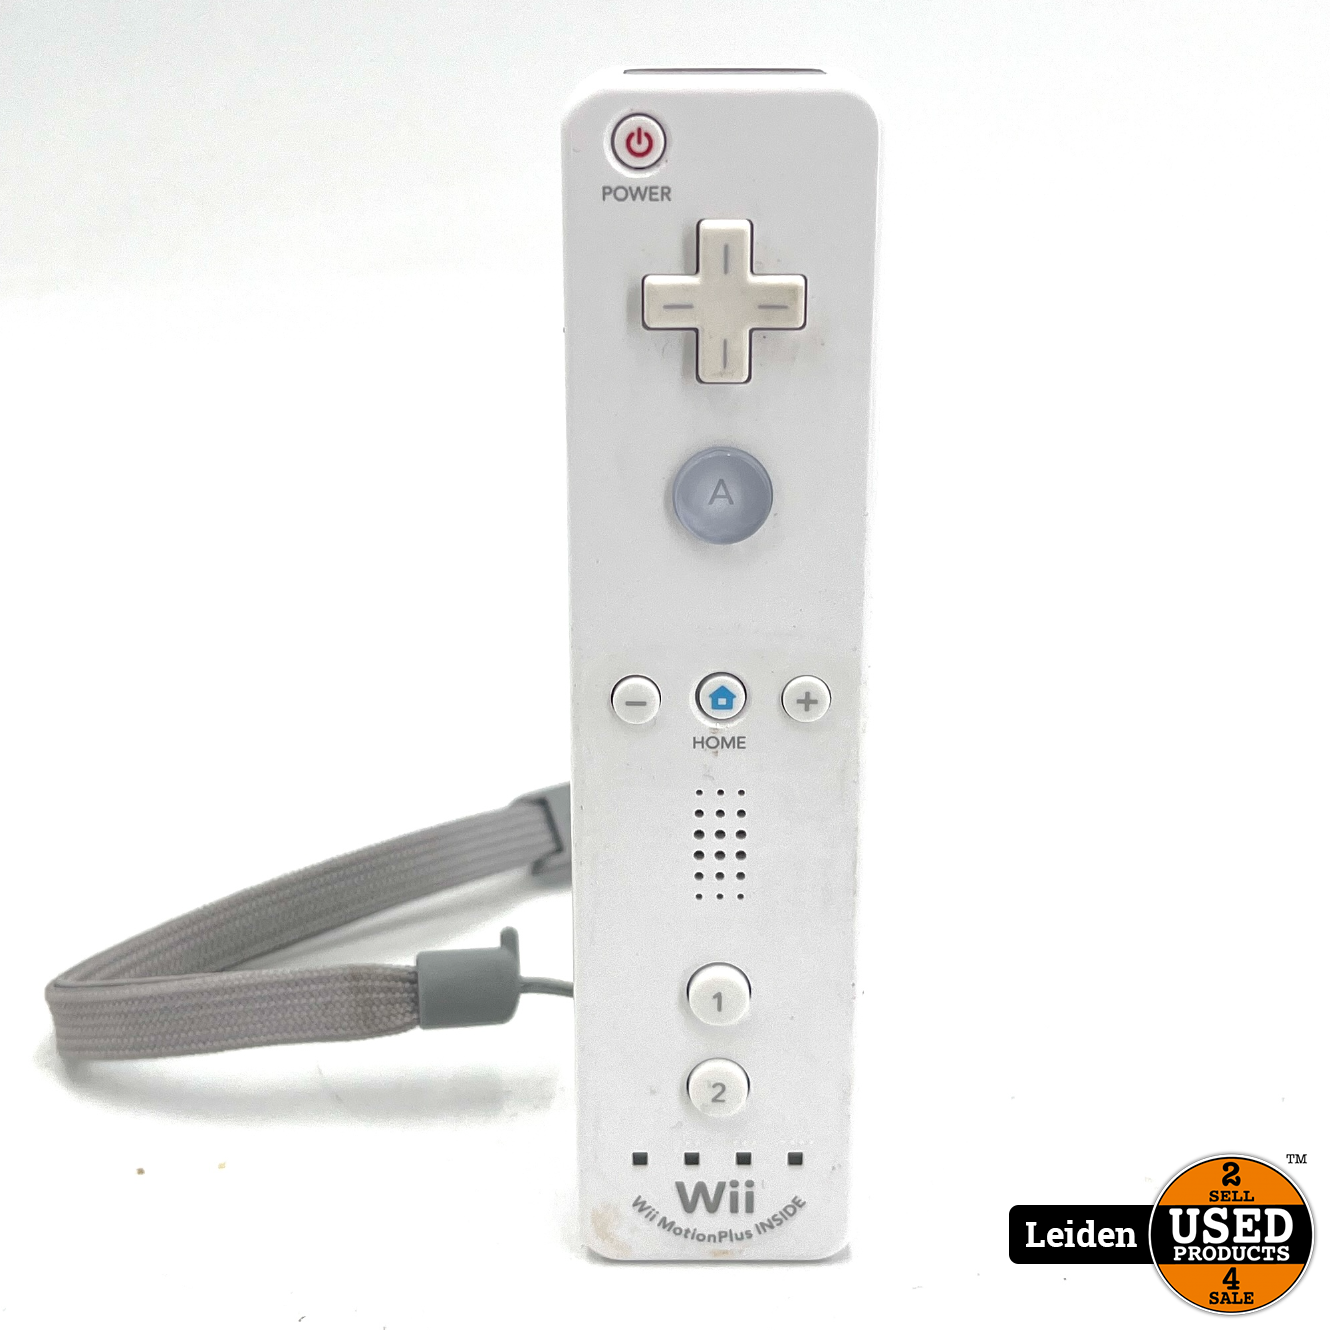 Nintendo Wii Controller + Motion Plus - Used Products Leiden